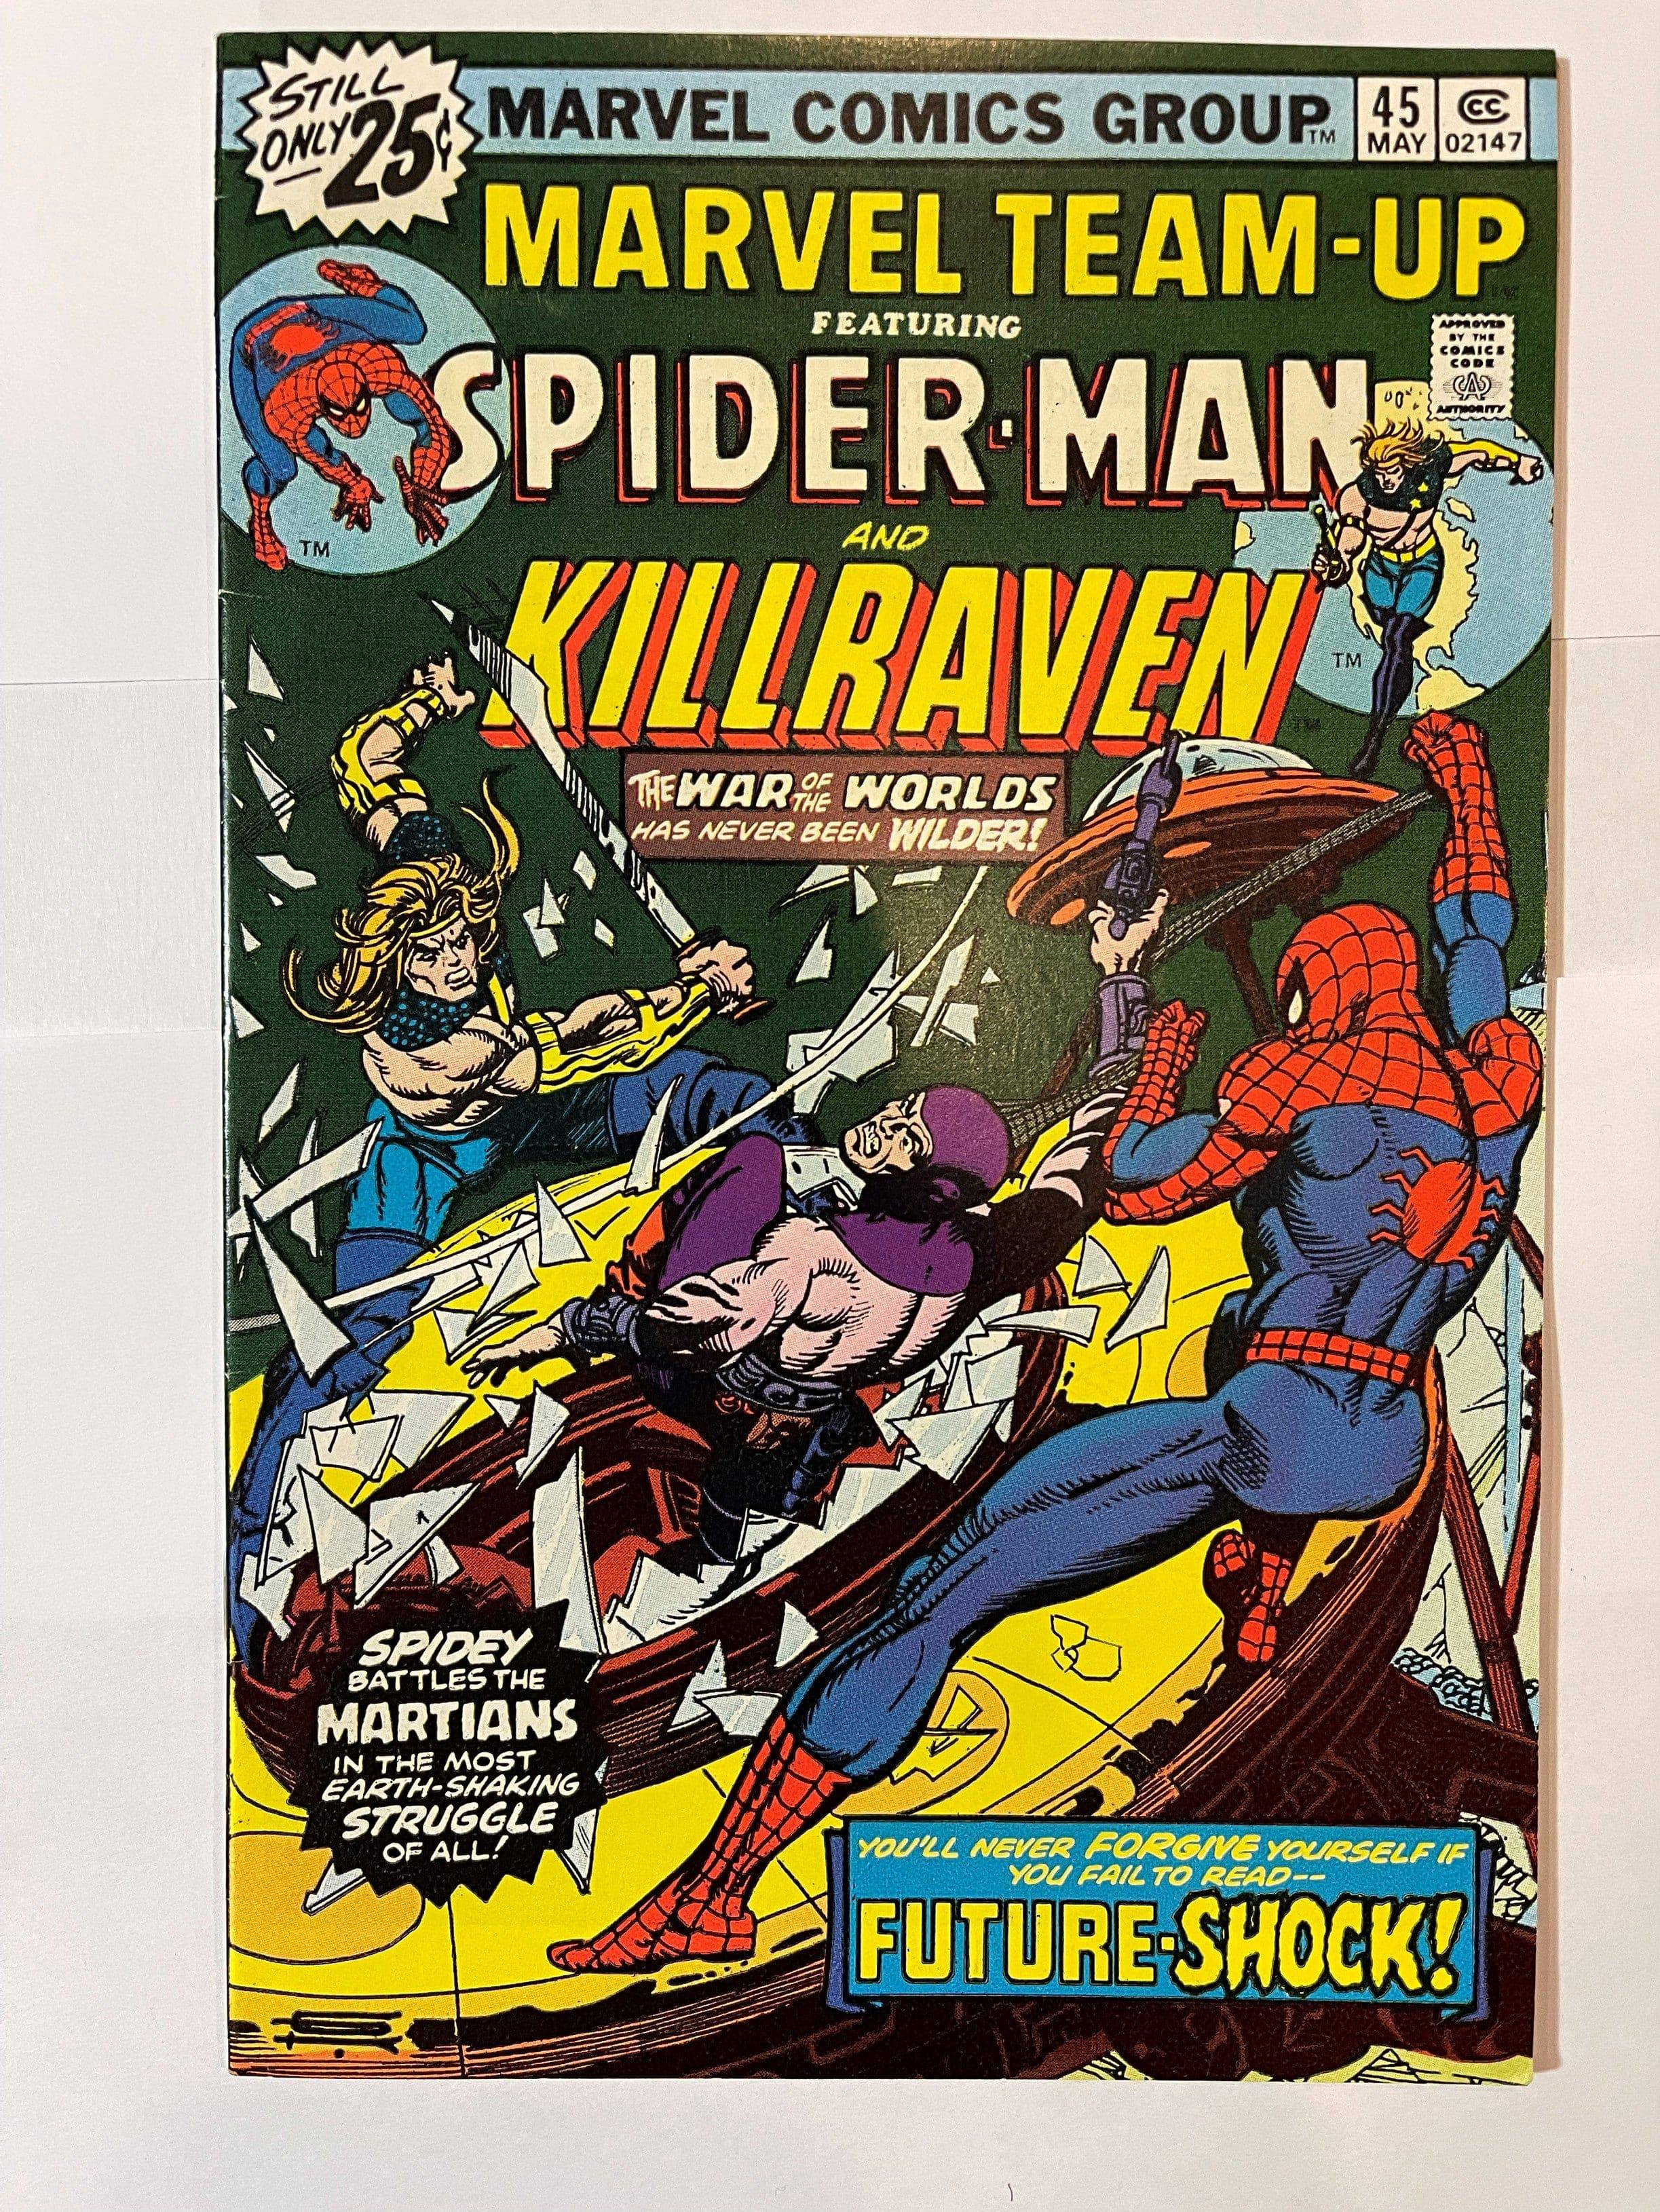 Marvel Team-Up Spider-Man & Kill Raven - #45 May 1976 - Fine - Used/Collector - Rare King Gaming